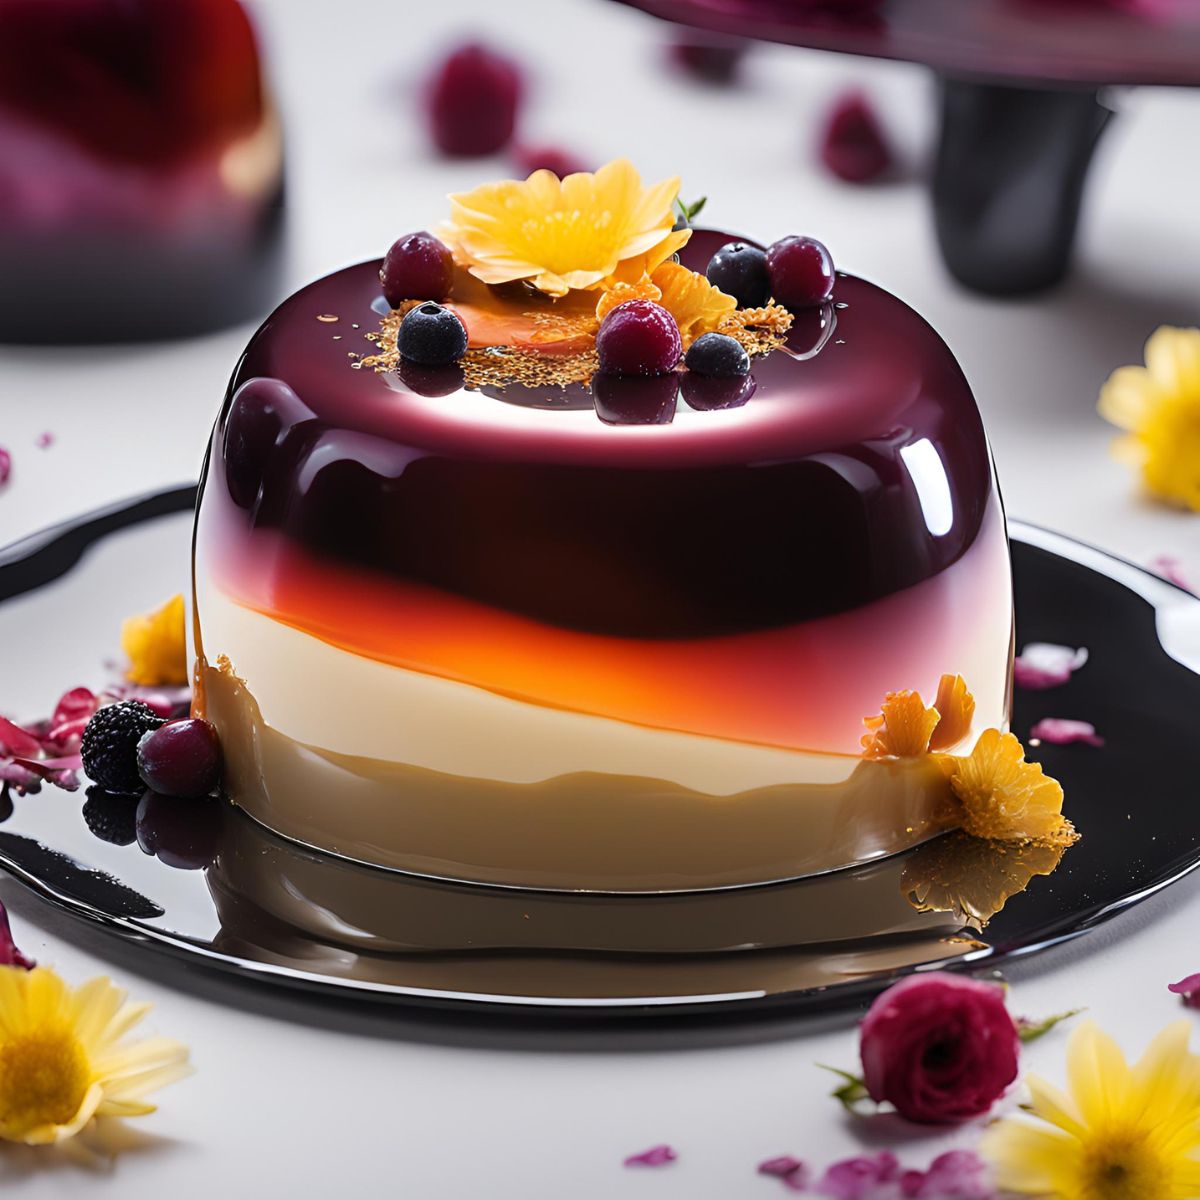 Mirror Glaze Recipe: Perfect Your Cakes with a Reflective Sheen!